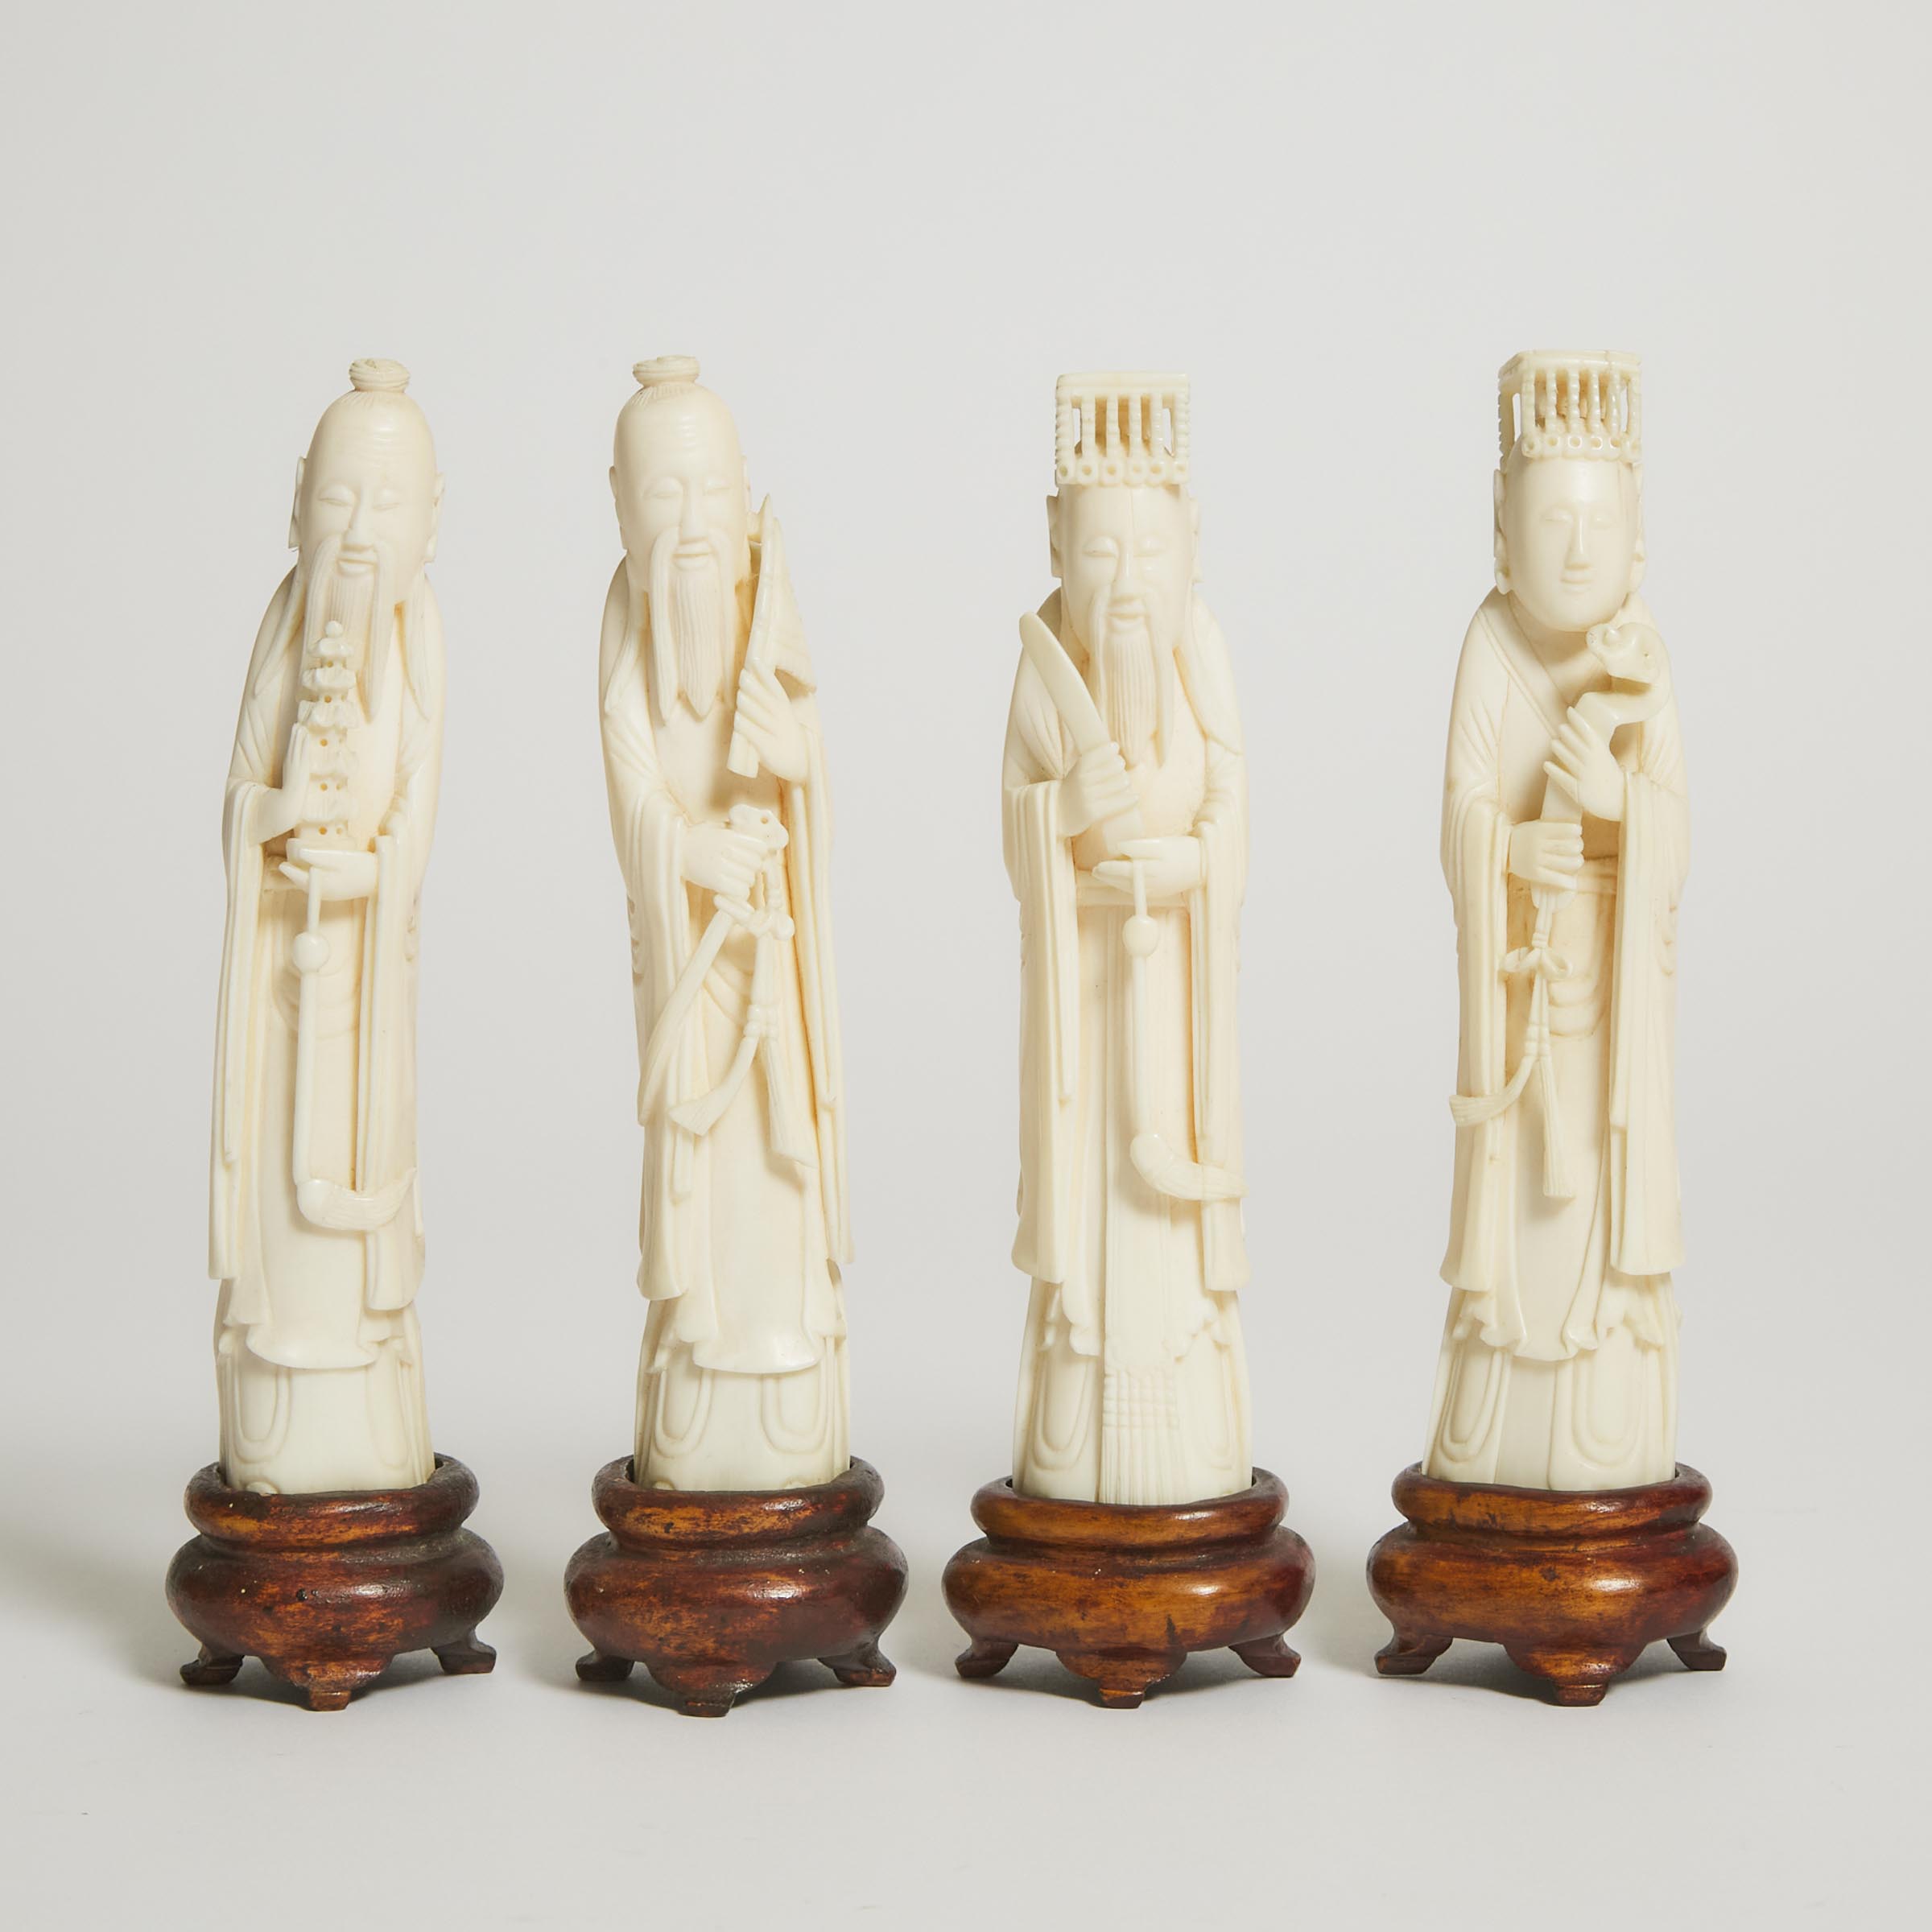 A Group of Four Ivory Figures of 3aa7ab